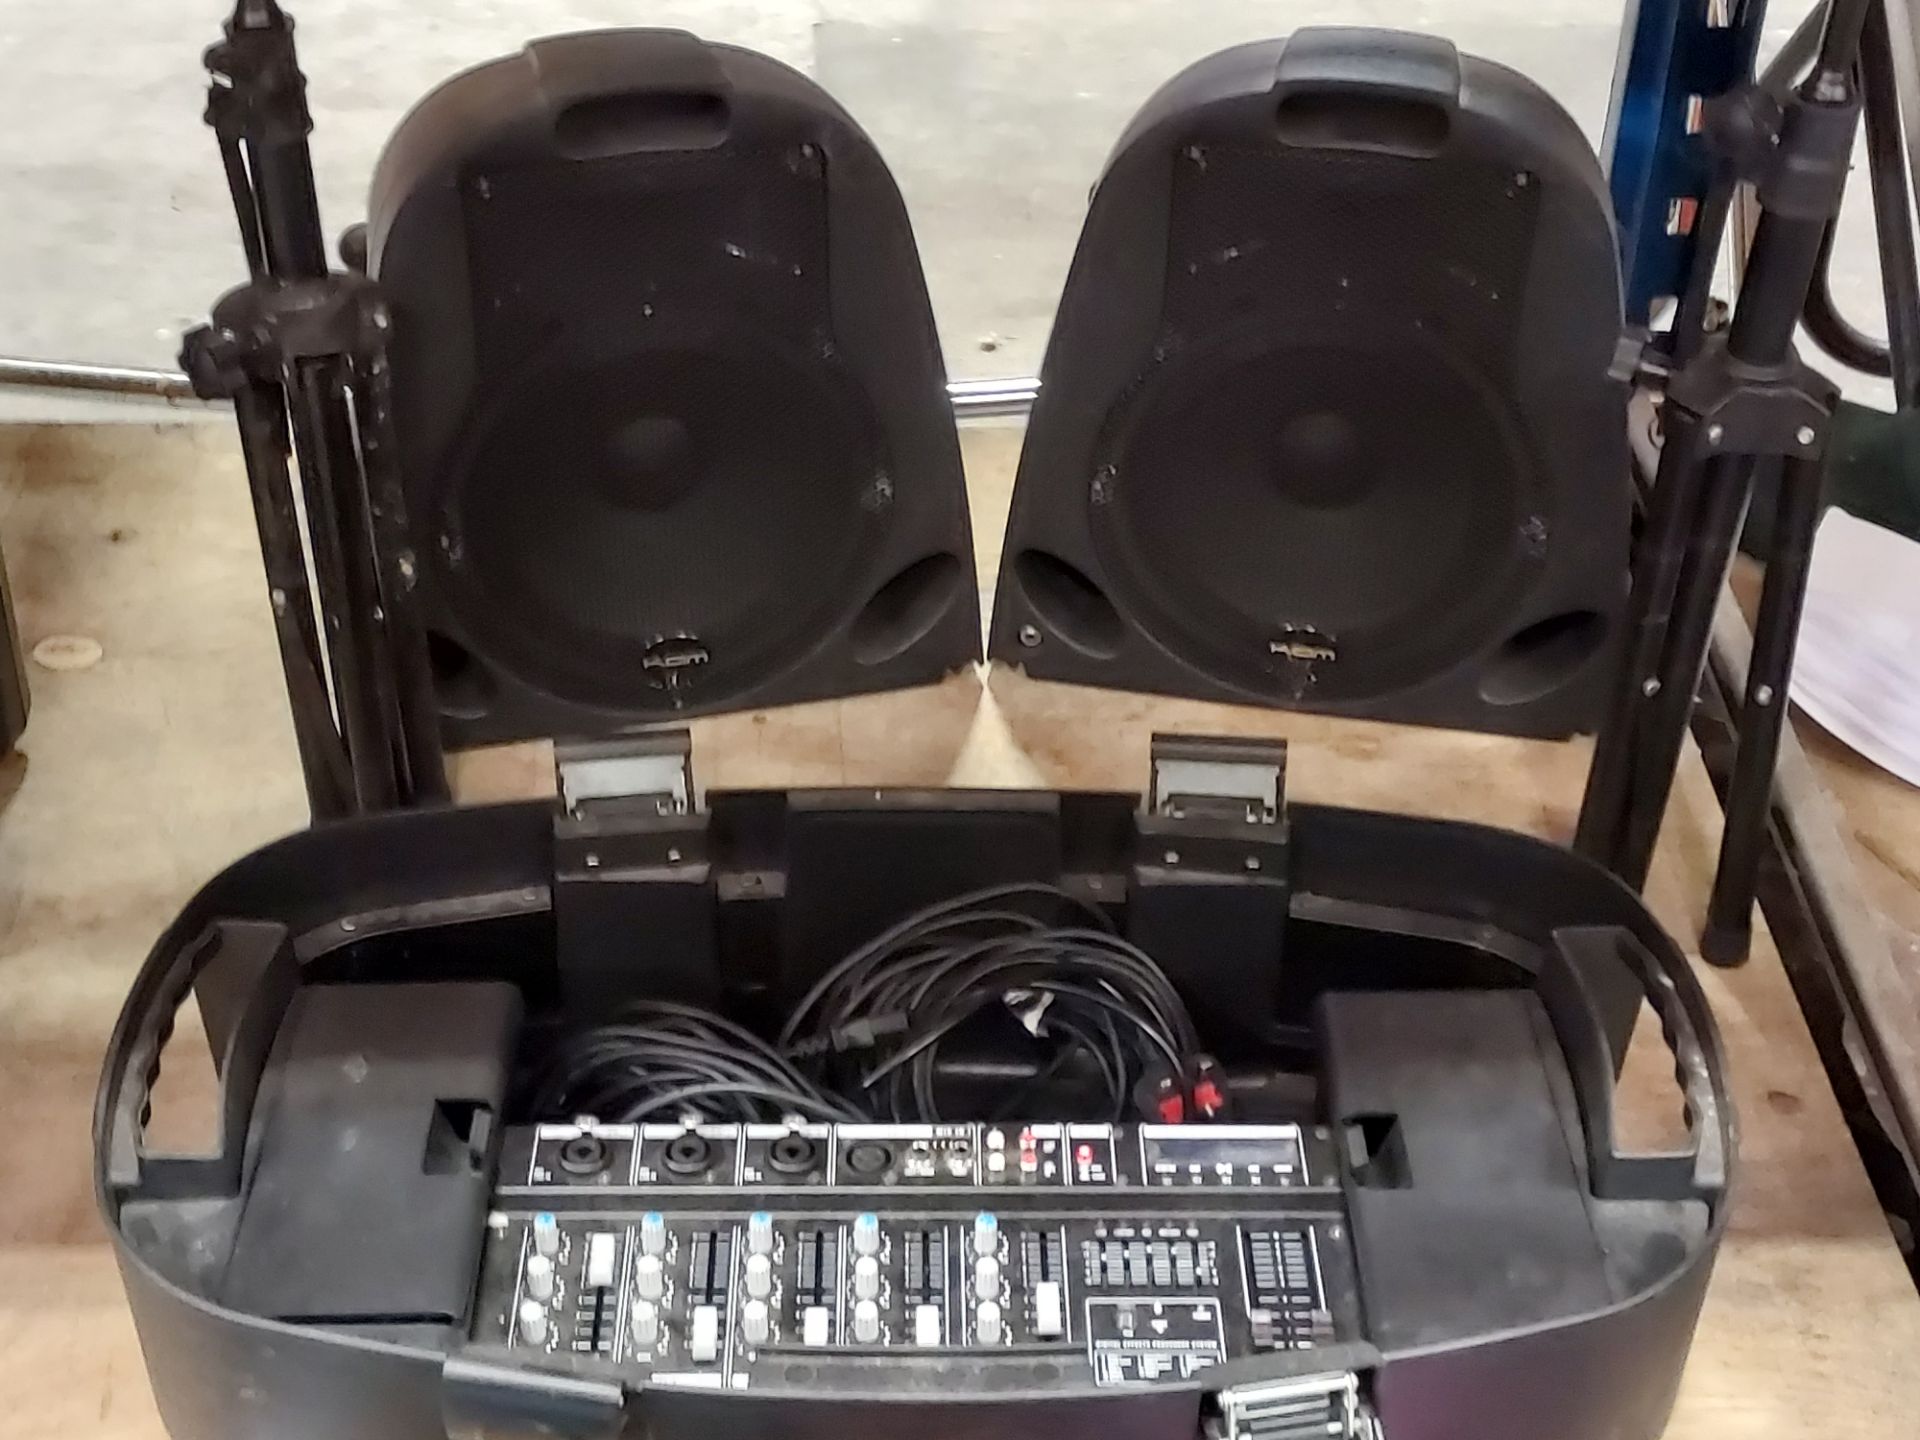 KAM TRANSPORTER 300 PORTABLE PA SYSTEM CONSISTING OF MIXING DECK, 2 SPEAKERS & SPEAKER STANDS (